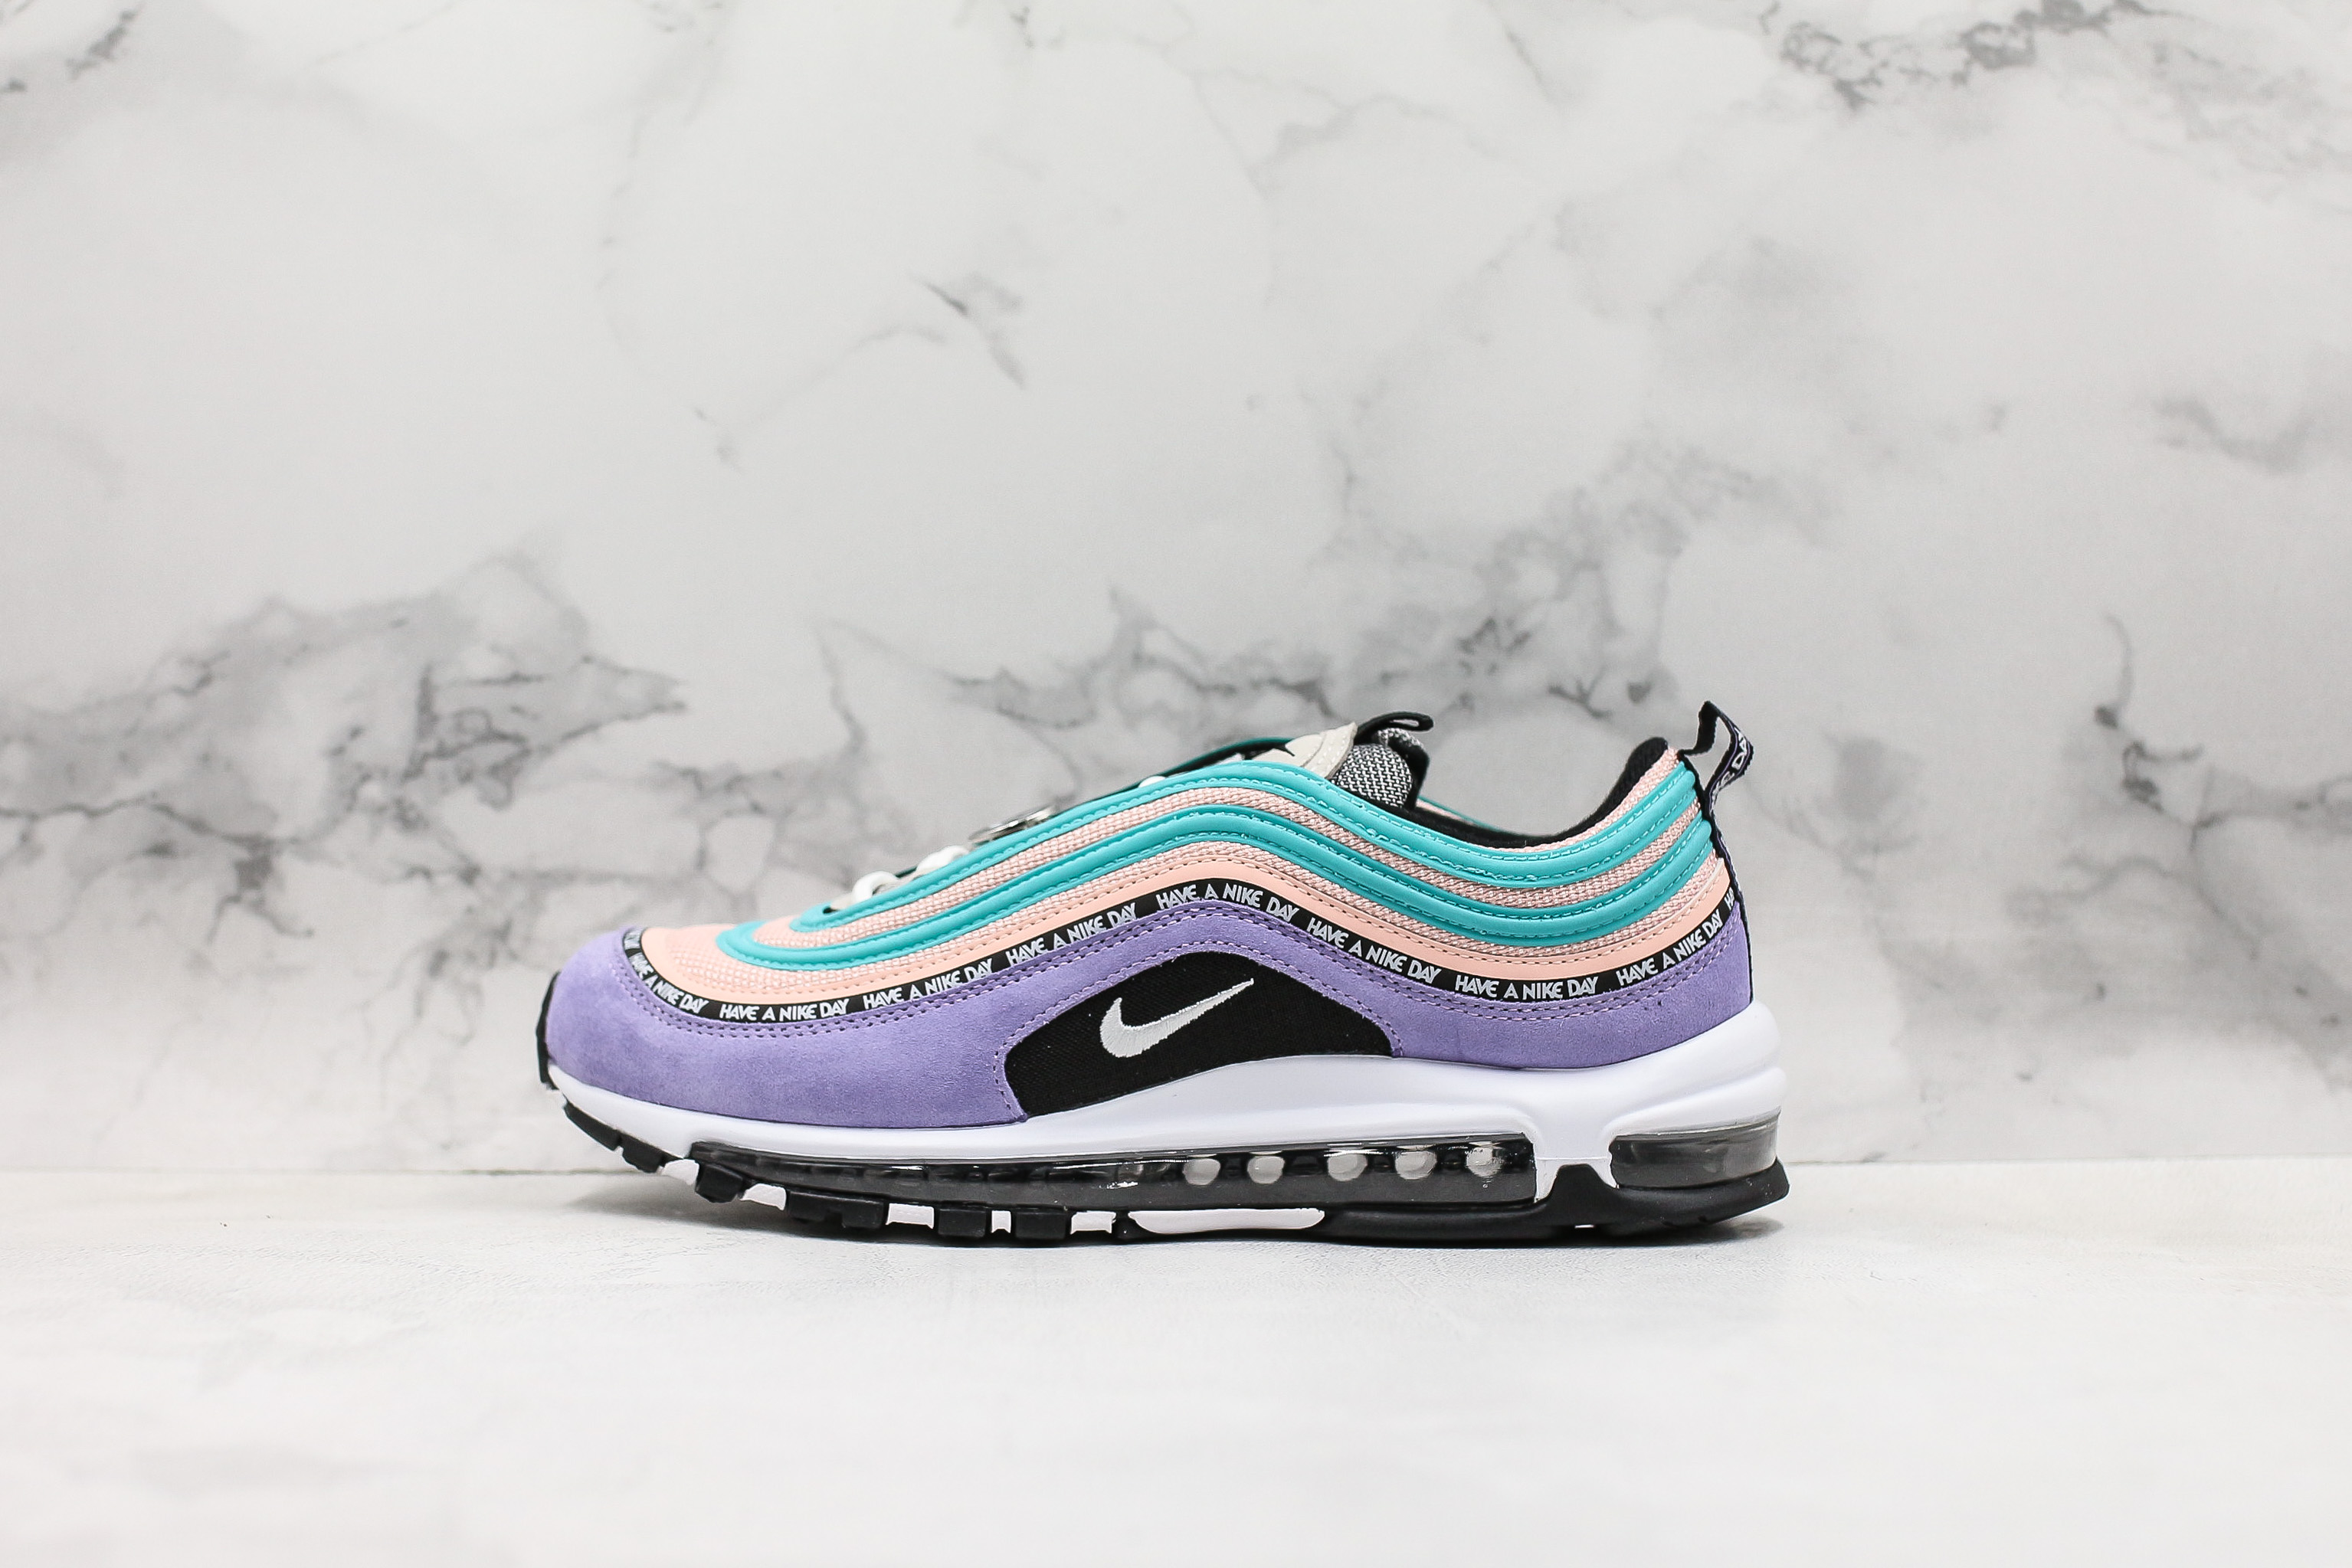 Nike Air Max 97 'Have a Nike Day' Space Purple/White-Black – The Sole Line